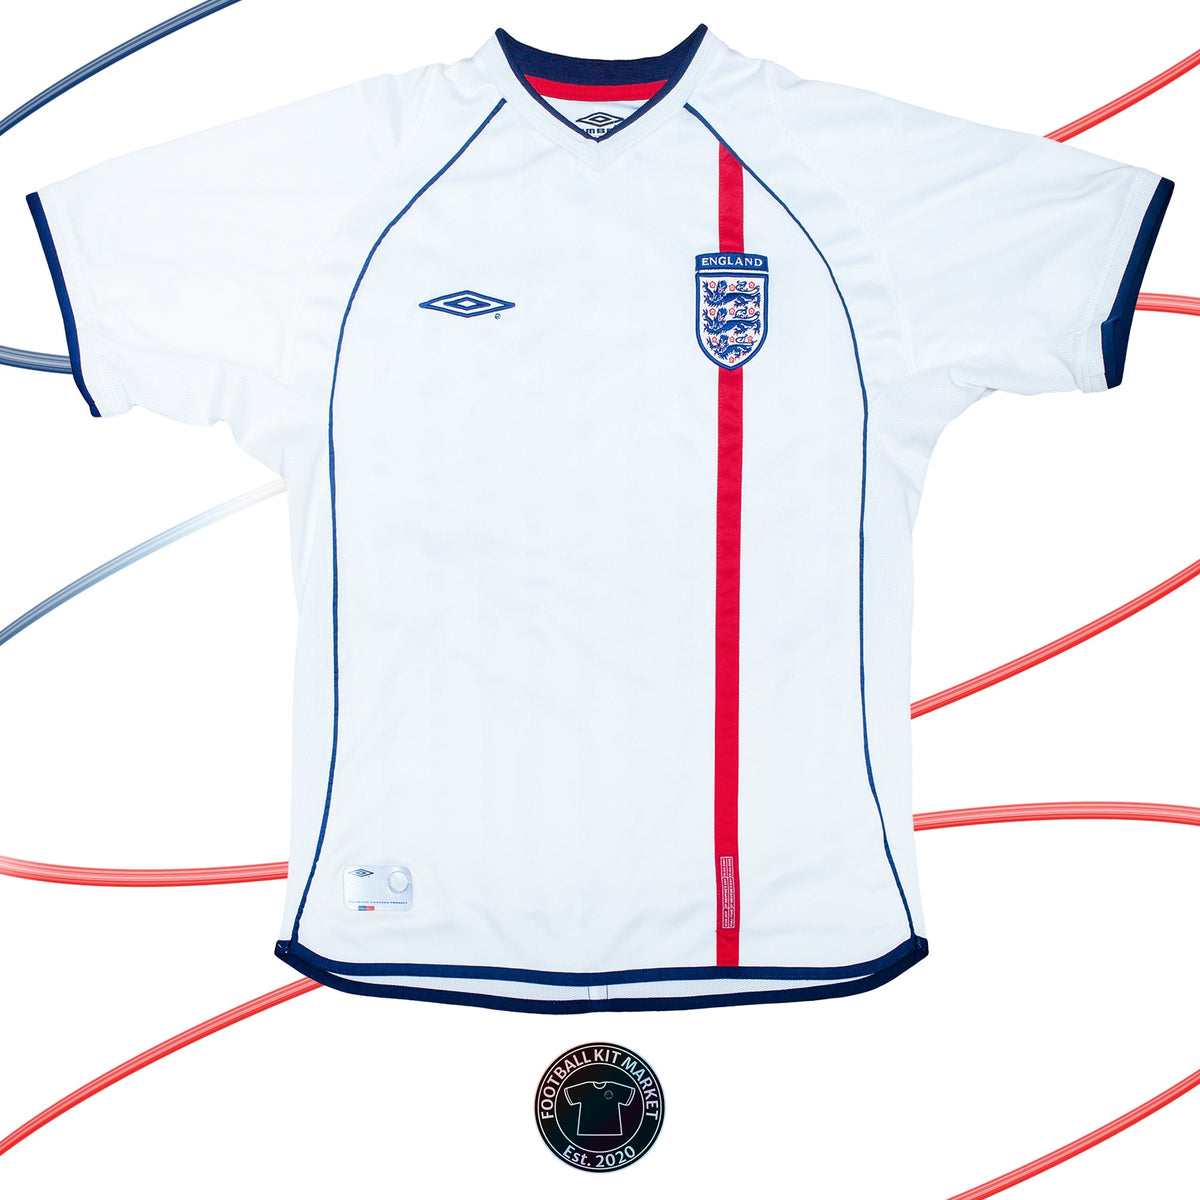 Genuine ENGLAND Home Shirt (2001-2003) - UMBRO (L) - Product Image from Football Kit Market